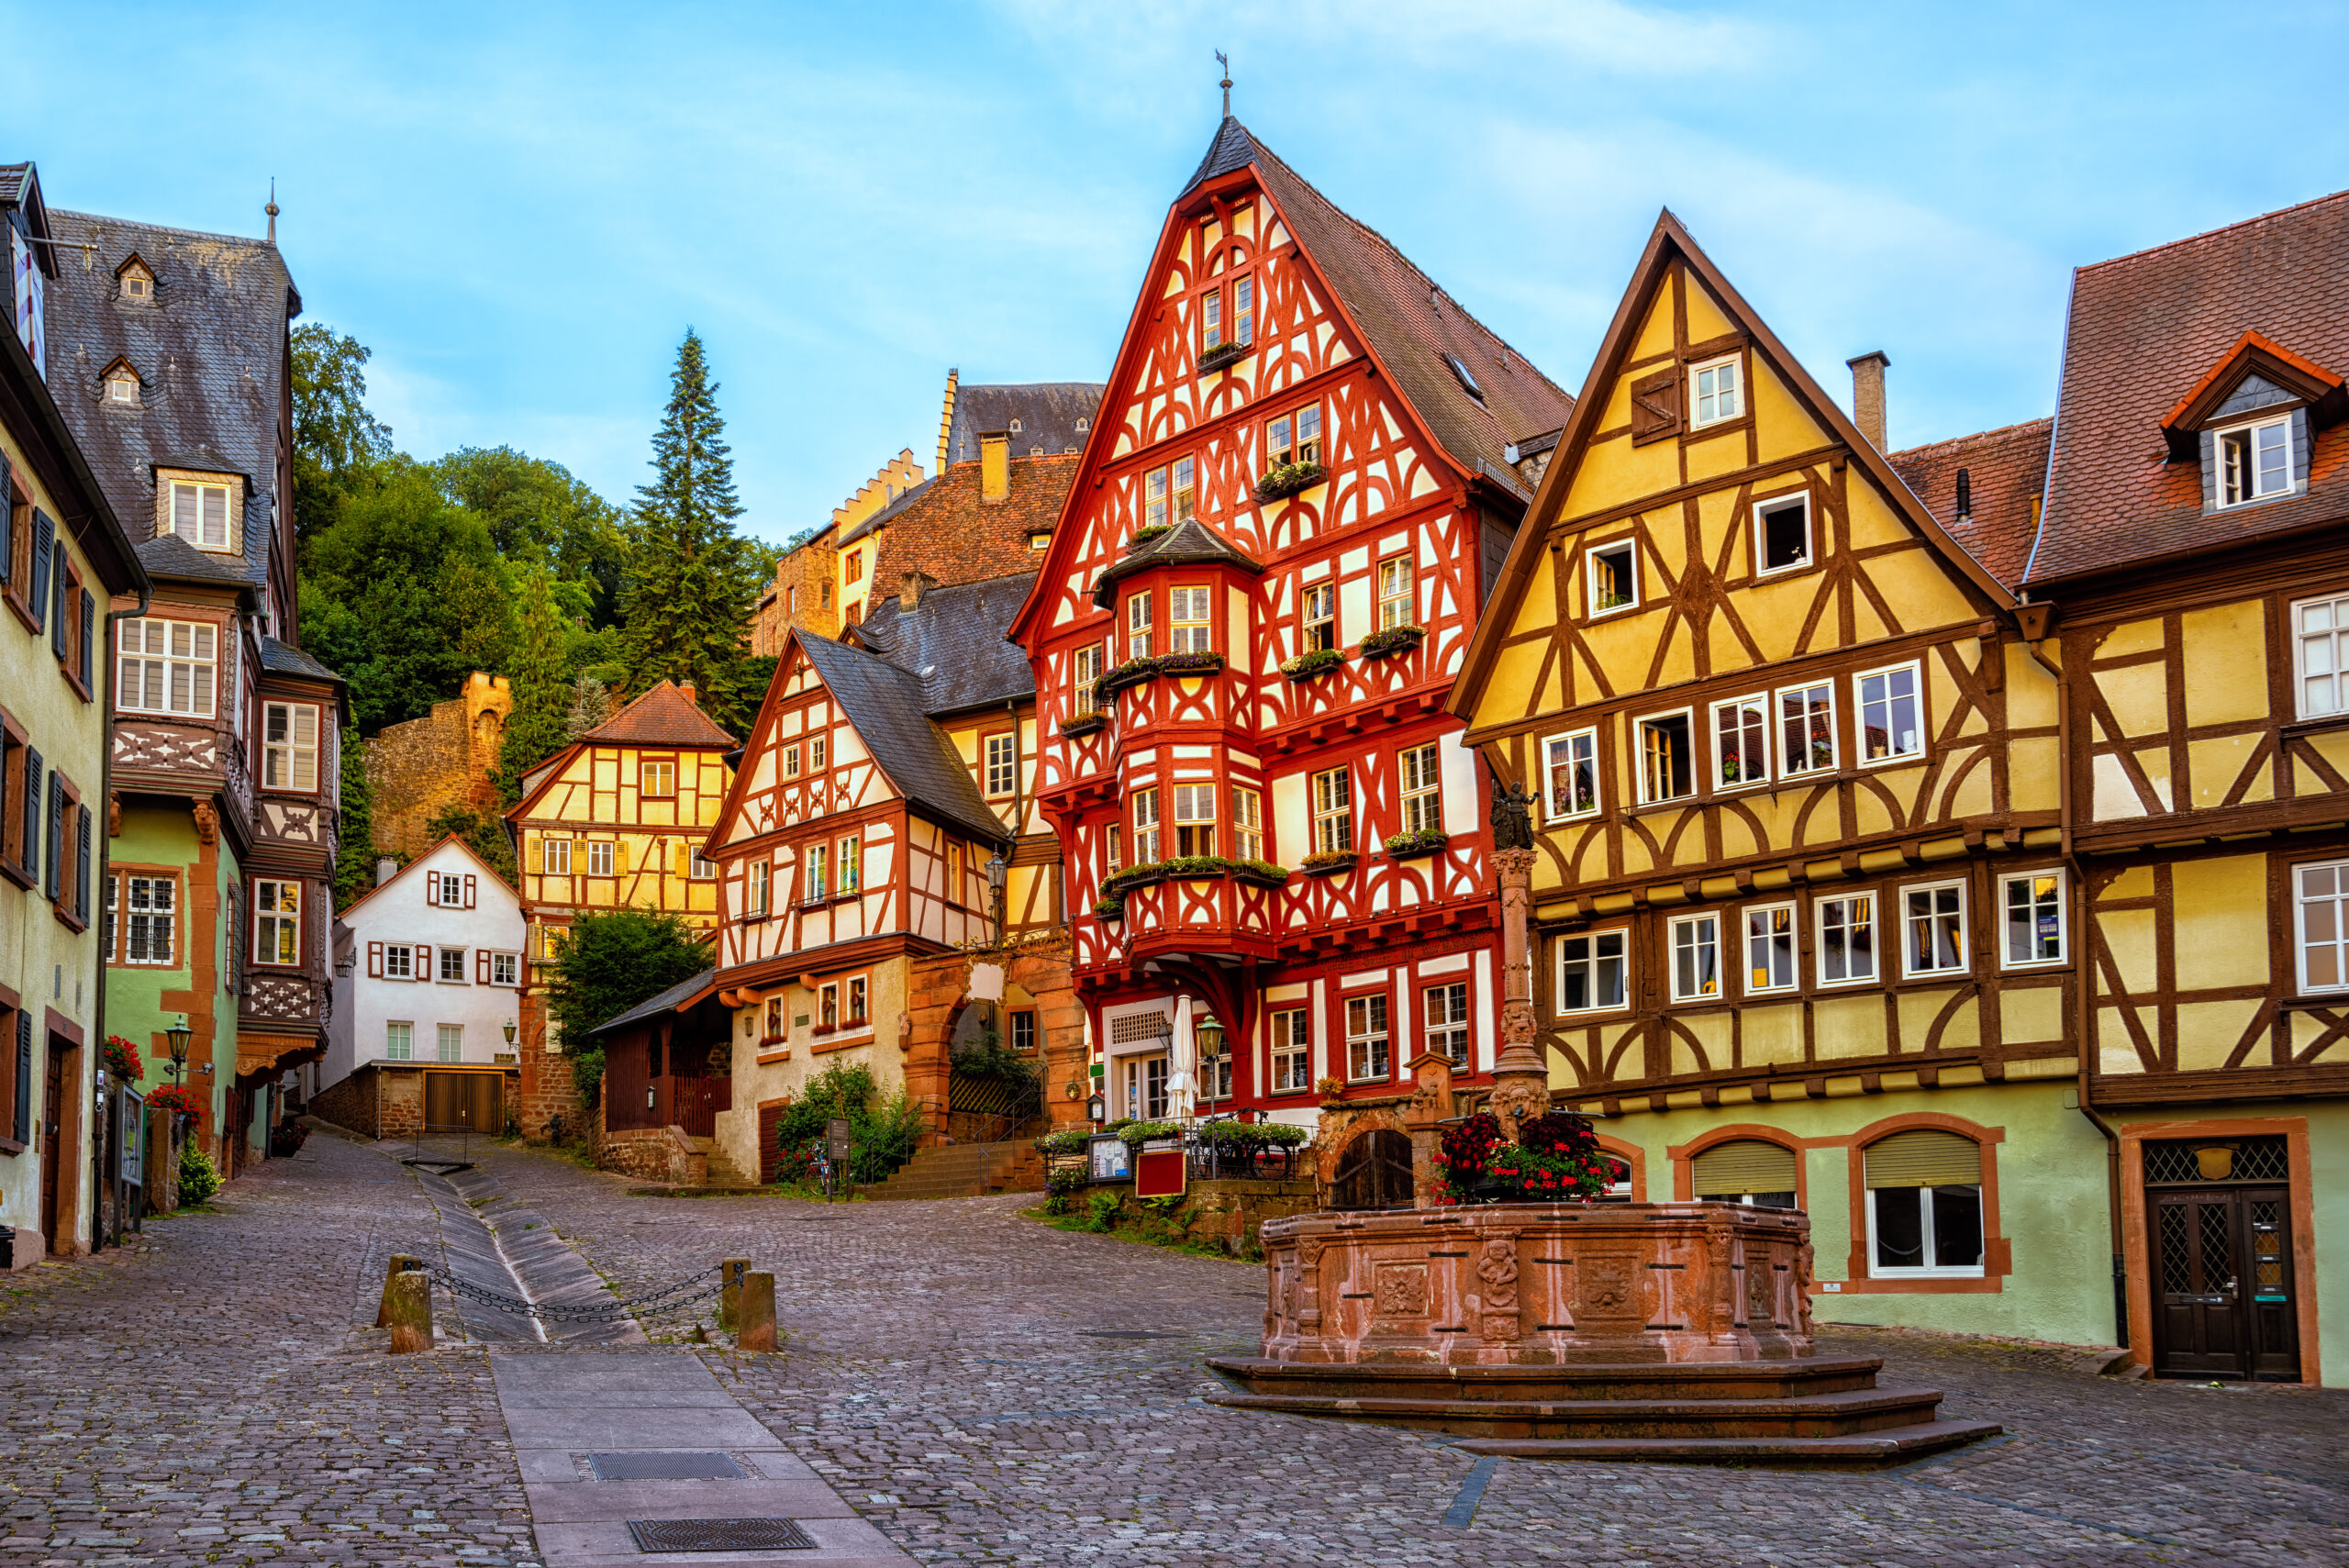 <p>You might be surprised that Germany has made the list of the best first-time solo travel destinations, but it’s warranted. There are lots of historic sights to see that’ll take you back in time. Germany has its fair share of thrilling underground clubs, museums, and other fun things.</p>